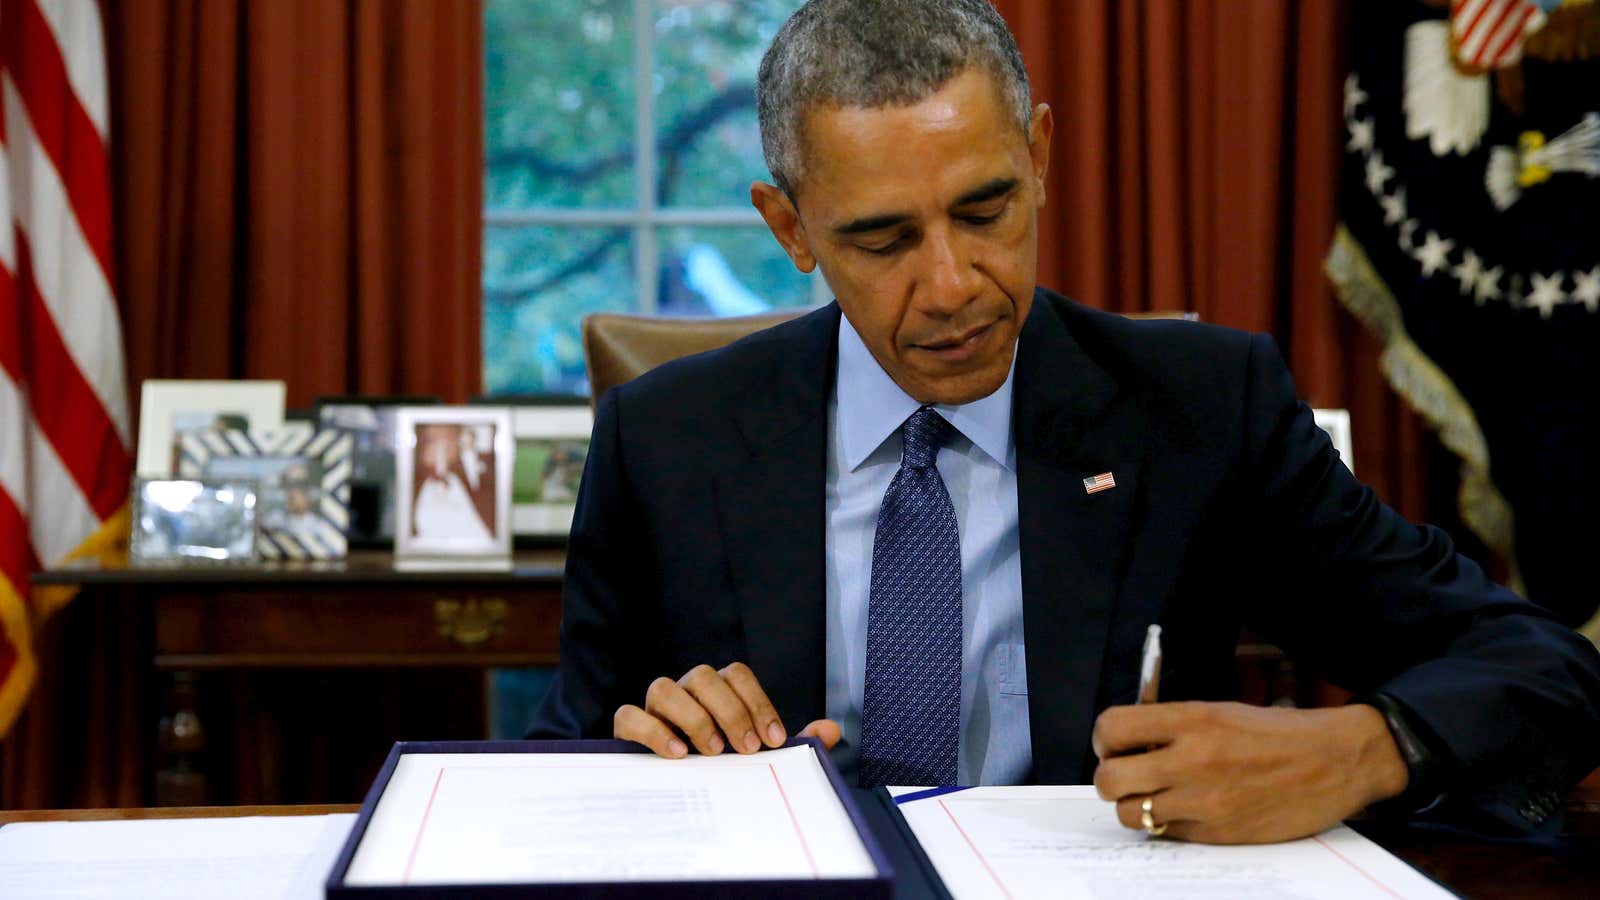 President Barack Obama signs the budget act of 2015 into law last November. A rare bipartisan agreement.